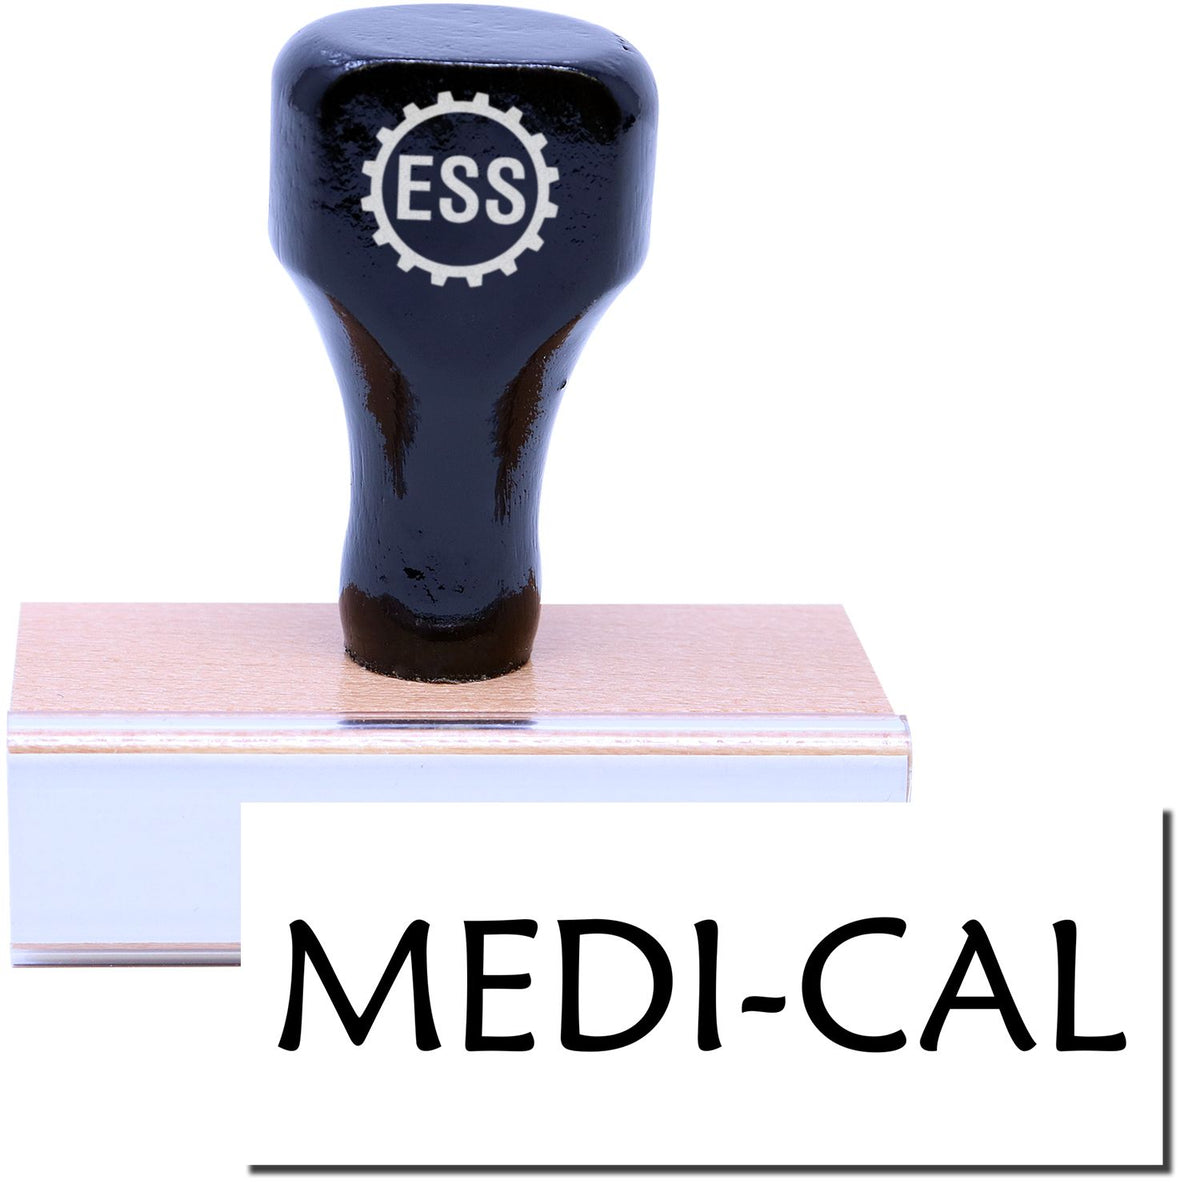 A stock office rubber stamp with a stamped image showing how the text &quot;MEDI-CAL&quot; is displayed after stamping.